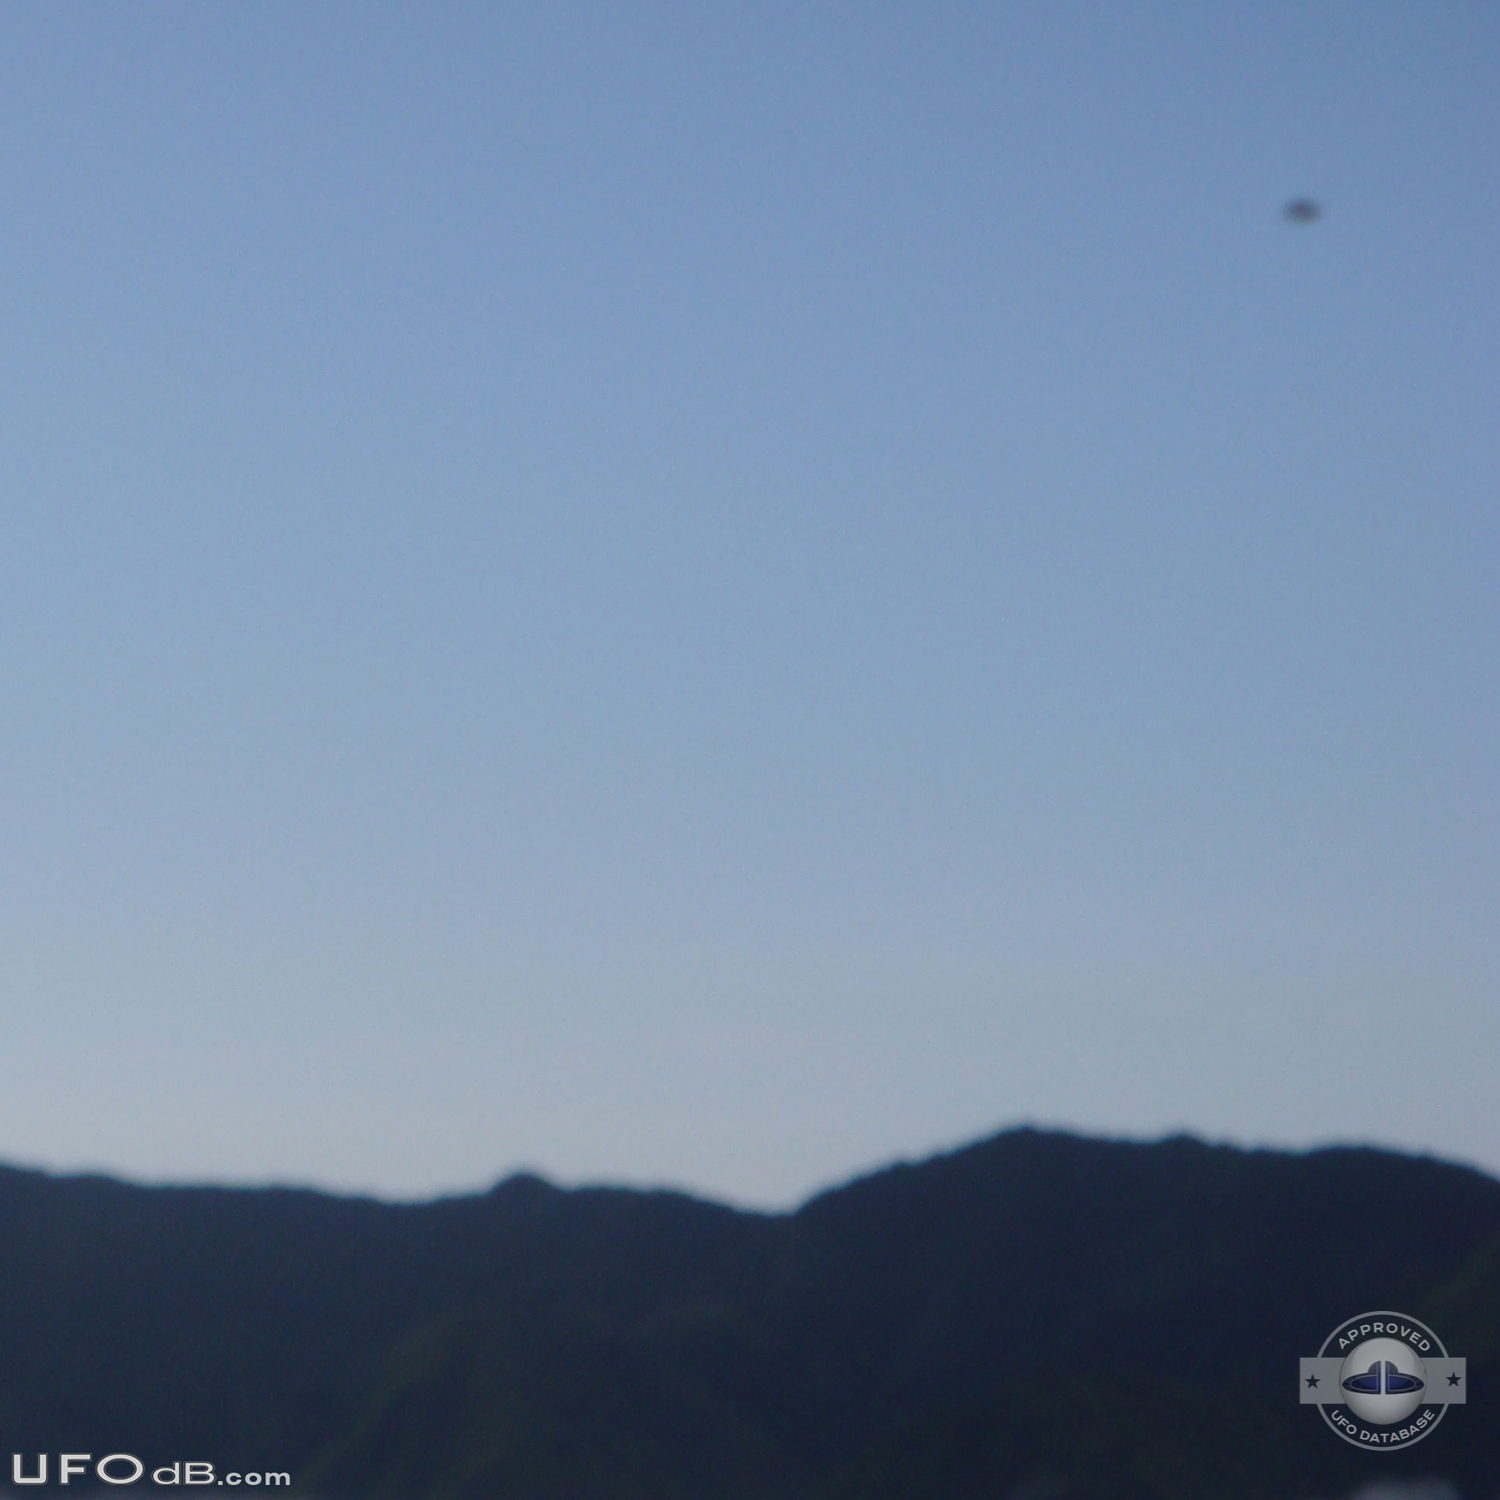 Two ufo pictures taken in the high mountains - Puerto Rico - July 2011 UFO Picture #376-1